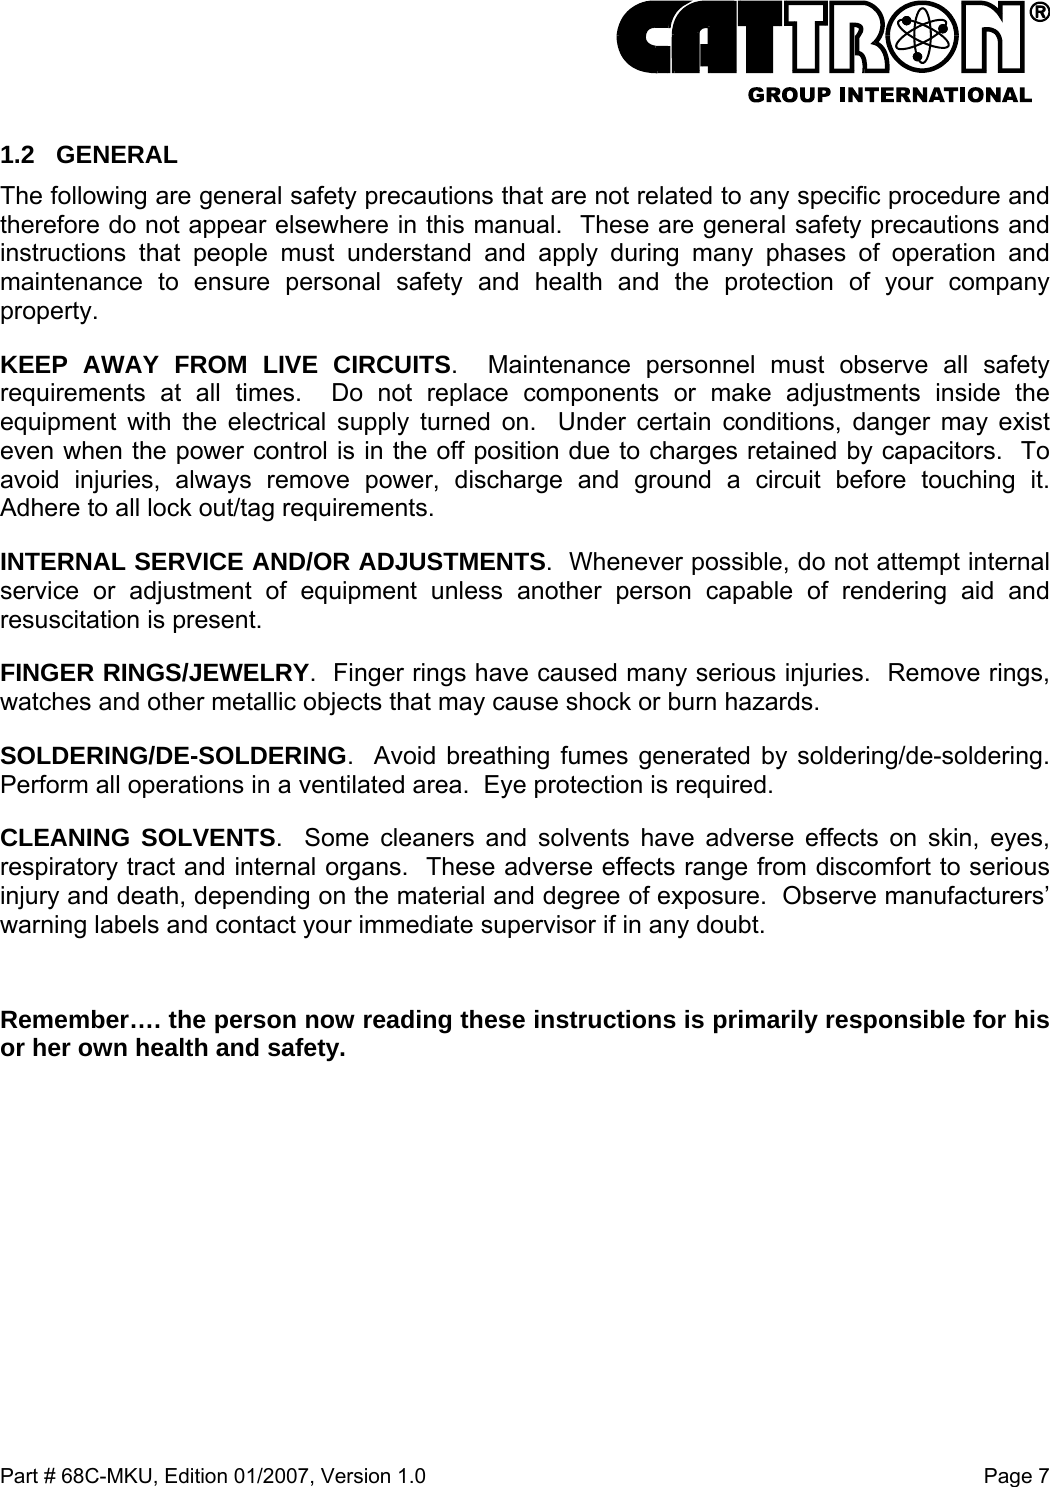  Part # 68C-MKU, Edition 01/2007, Version 1.0  Page 7   1.2 GENERAL The following are general safety precautions that are not related to any specific procedure and therefore do not appear elsewhere in this manual.  These are general safety precautions and instructions that people must understand and apply during many phases of operation and maintenance to ensure personal safety and health and the protection of your company property. KEEP AWAY FROM LIVE CIRCUITS.  Maintenance personnel must observe all safety requirements at all times.  Do not replace components or make adjustments inside the equipment with the electrical supply turned on.  Under certain conditions, danger may exist even when the power control is in the off position due to charges retained by capacitors.  To avoid injuries, always remove power, discharge and ground a circuit before touching it.  Adhere to all lock out/tag requirements. INTERNAL SERVICE AND/OR ADJUSTMENTS.  Whenever possible, do not attempt internal service or adjustment of equipment unless another person capable of rendering aid and resuscitation is present. FINGER RINGS/JEWELRY.  Finger rings have caused many serious injuries.  Remove rings, watches and other metallic objects that may cause shock or burn hazards.   SOLDERING/DE-SOLDERING.  Avoid breathing fumes generated by soldering/de-soldering. Perform all operations in a ventilated area.  Eye protection is required. CLEANING SOLVENTS.  Some cleaners and solvents have adverse effects on skin, eyes, respiratory tract and internal organs.  These adverse effects range from discomfort to serious injury and death, depending on the material and degree of exposure.  Observe manufacturers’ warning labels and contact your immediate supervisor if in any doubt.  Remember…. the person now reading these instructions is primarily responsible for his or her own health and safety.  